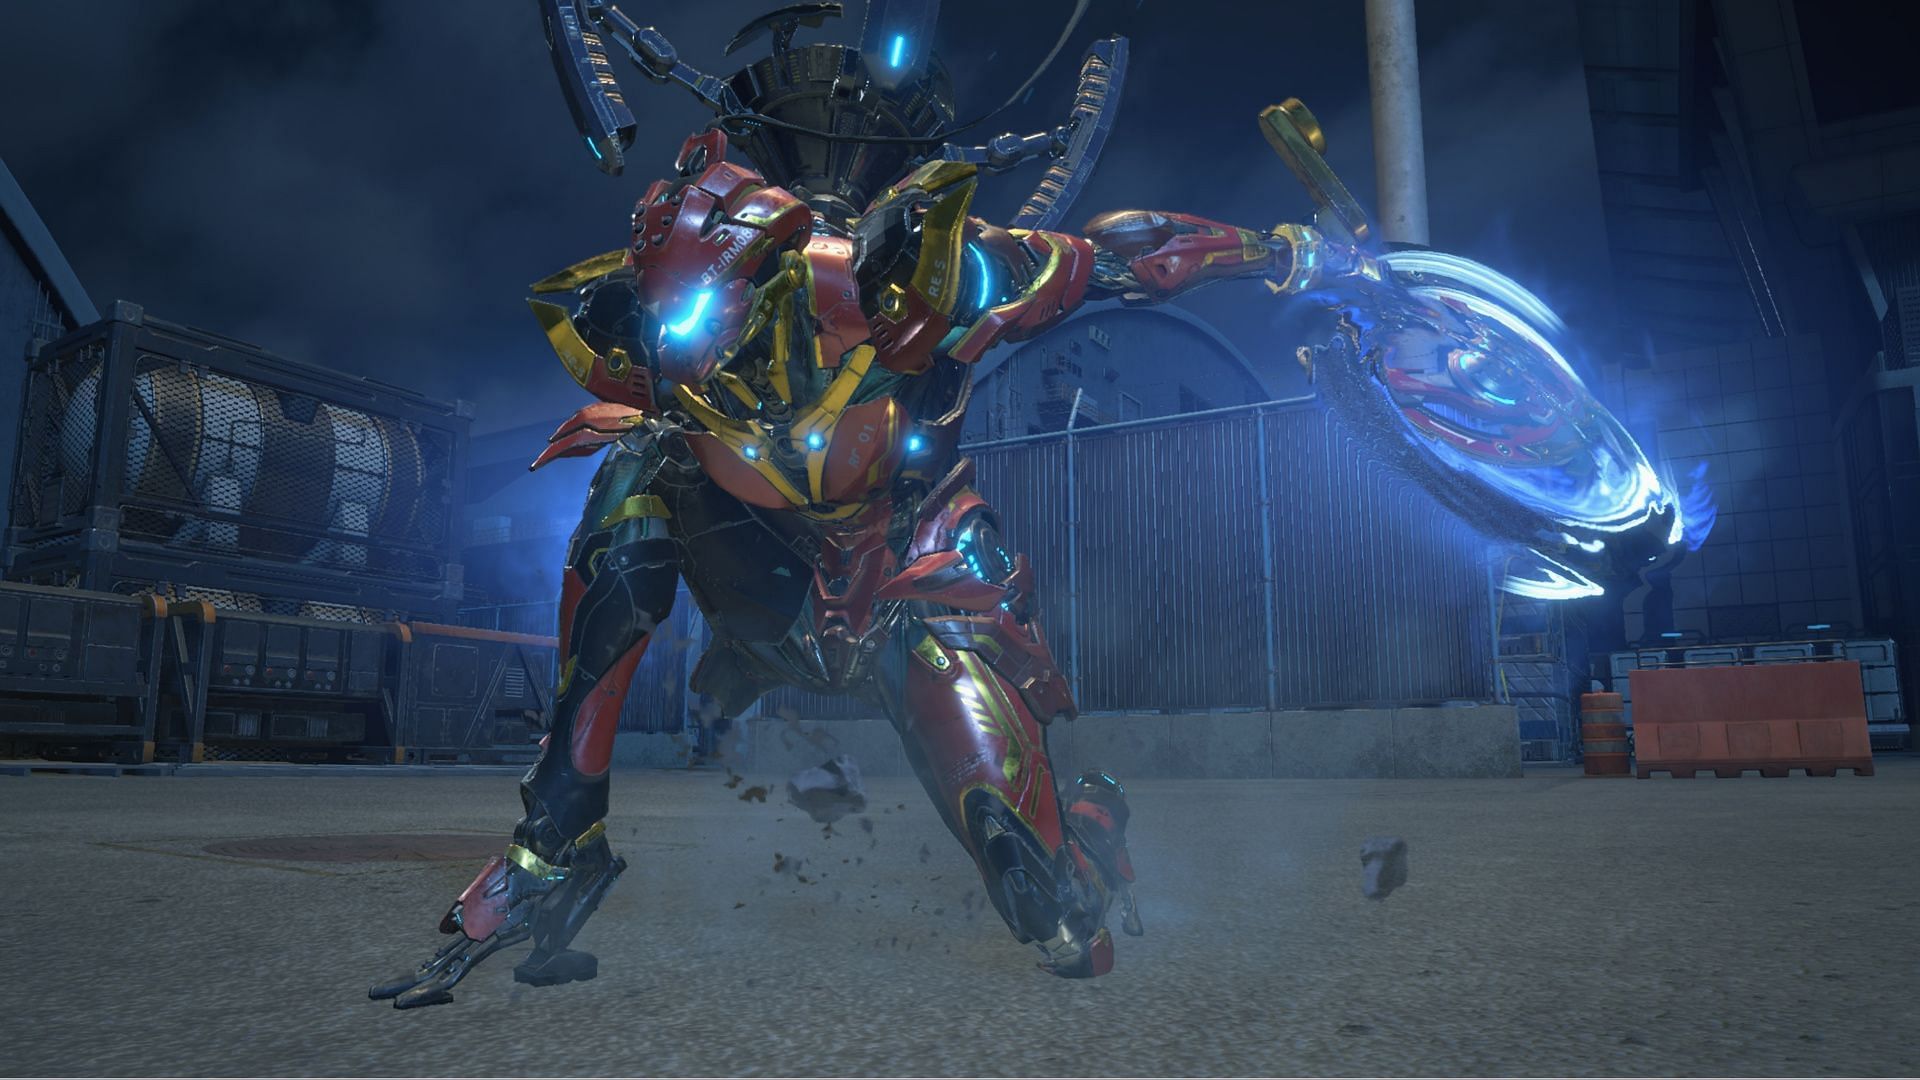 The Variant suit of Zephyr is called the Energy Chakram (Image via Capcom)